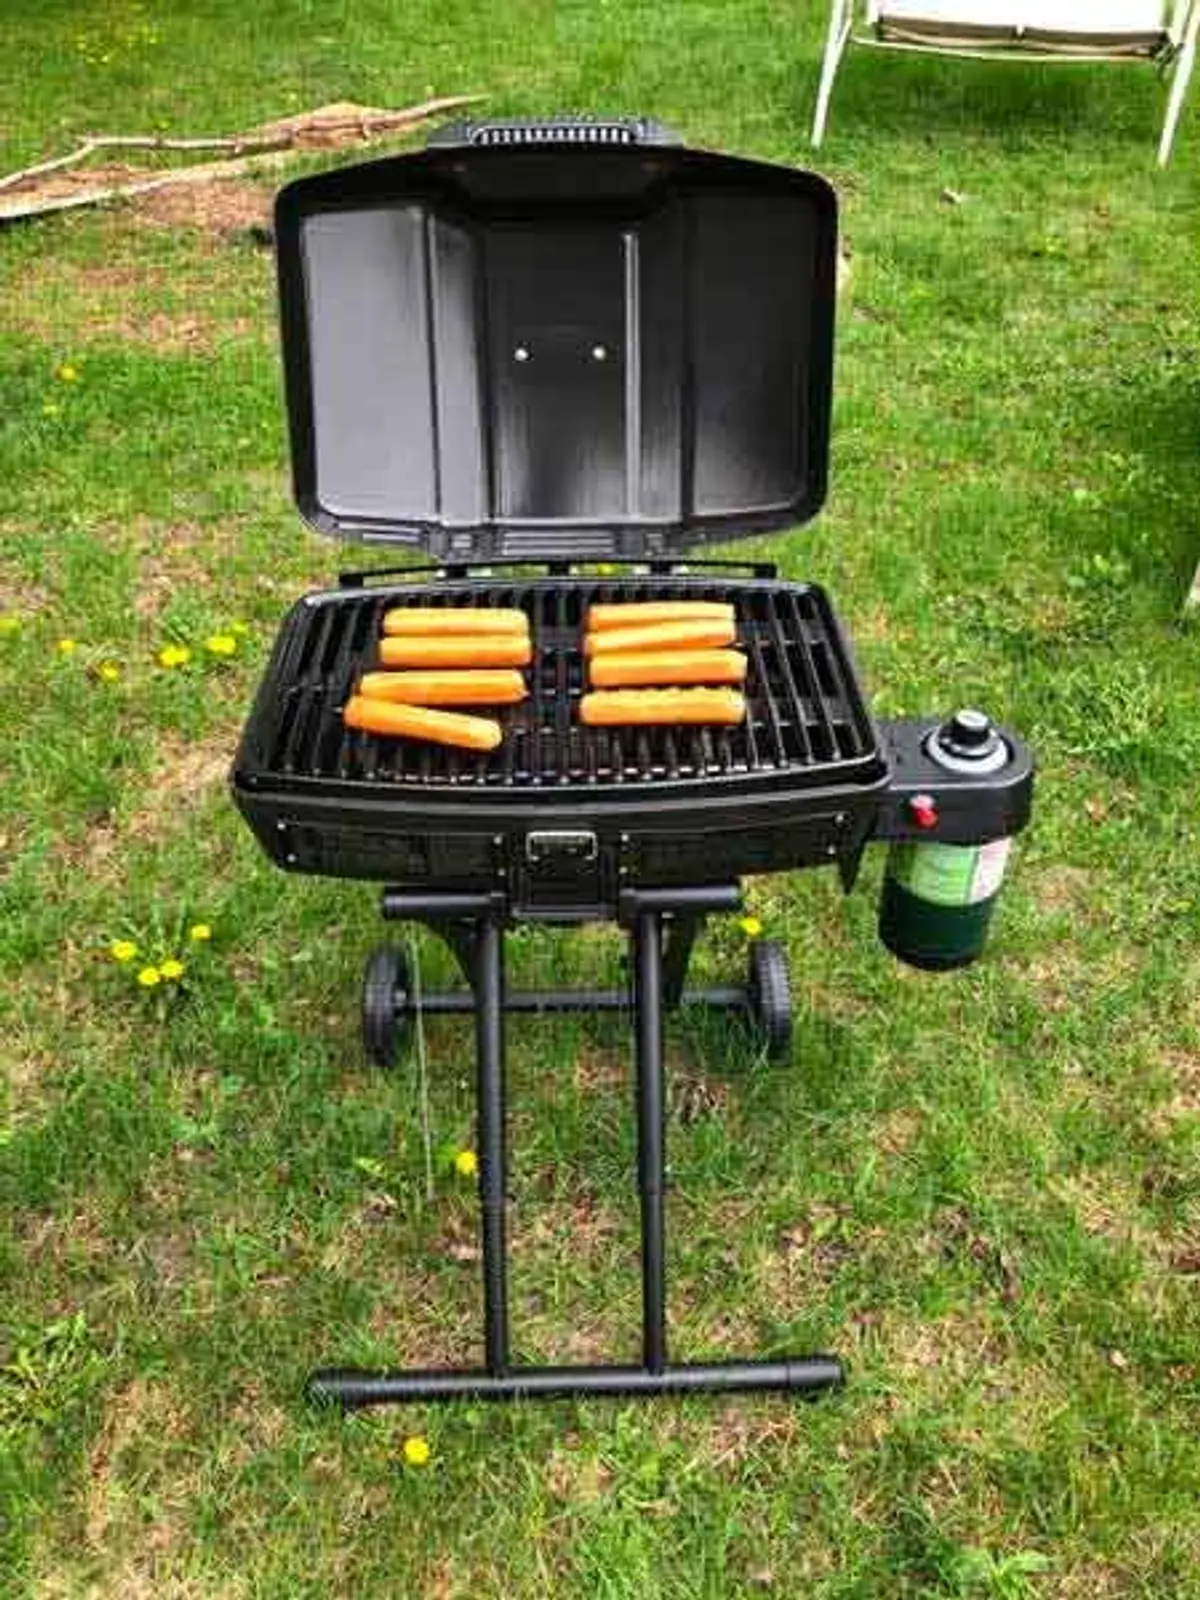 The Coleman Sportsters is a portable propane grill used for traveling